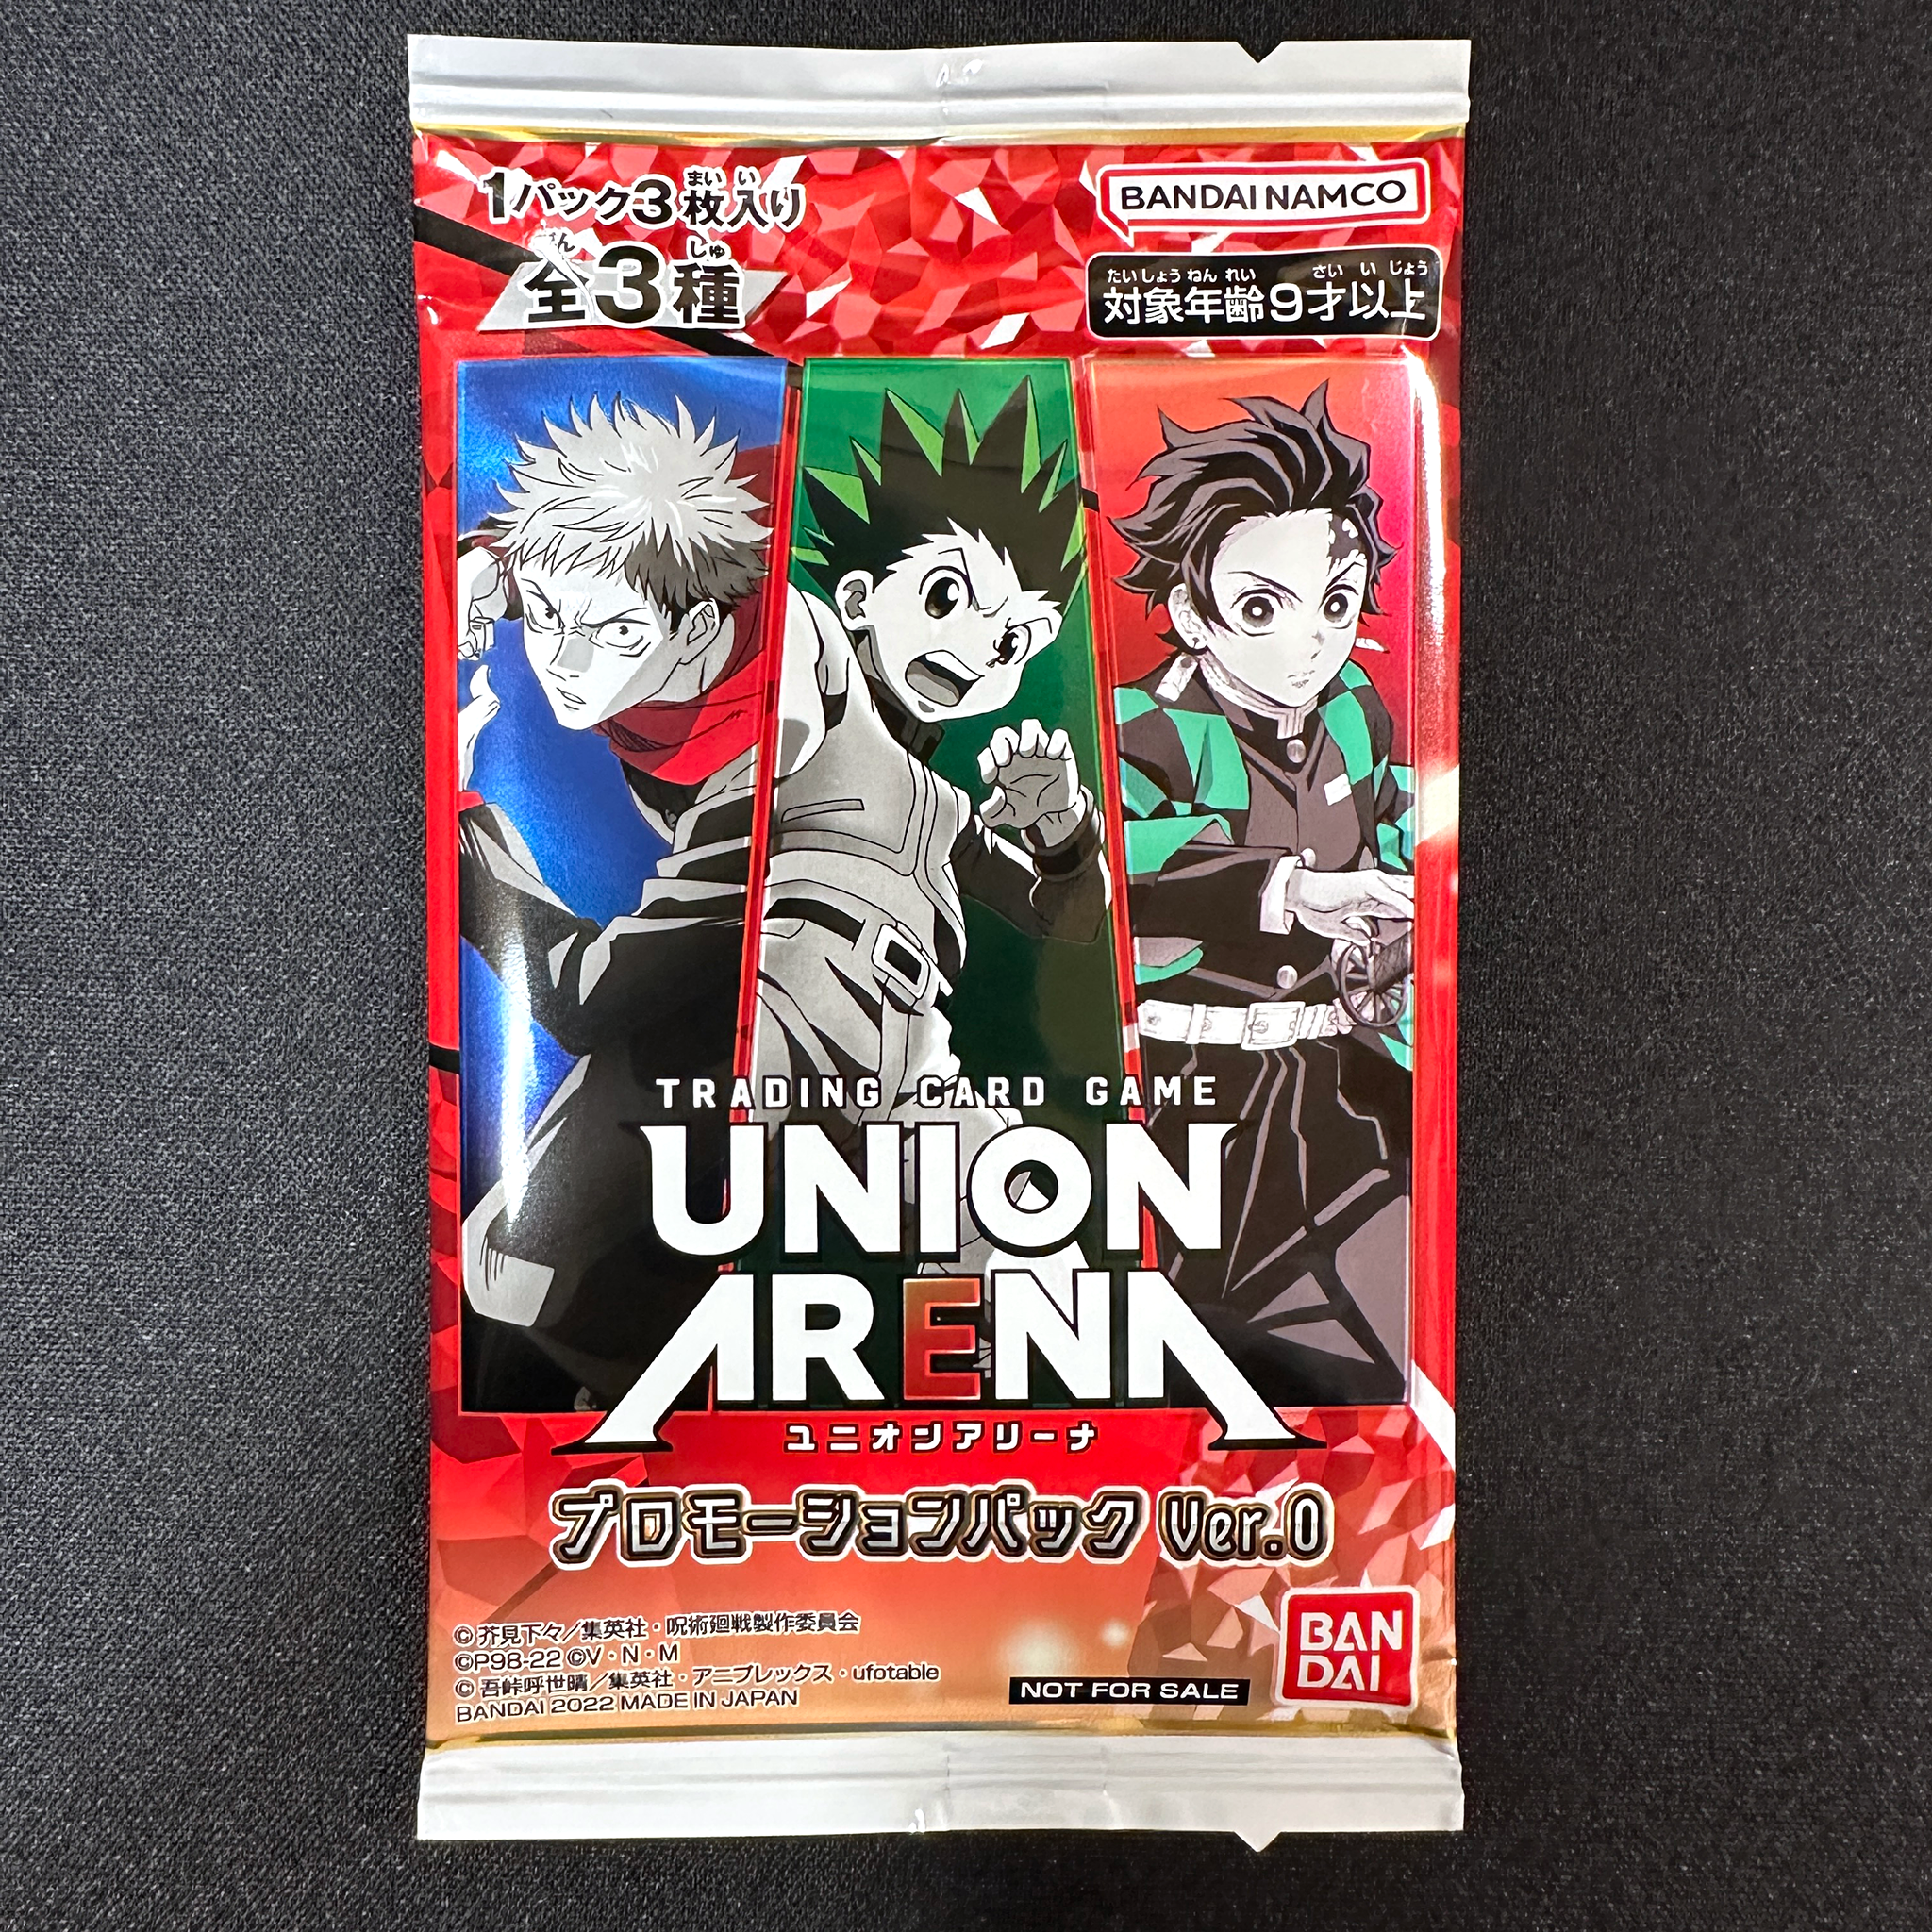 TRADING CARD GAME UNION ARENA PROMOTION PACK Ver.0